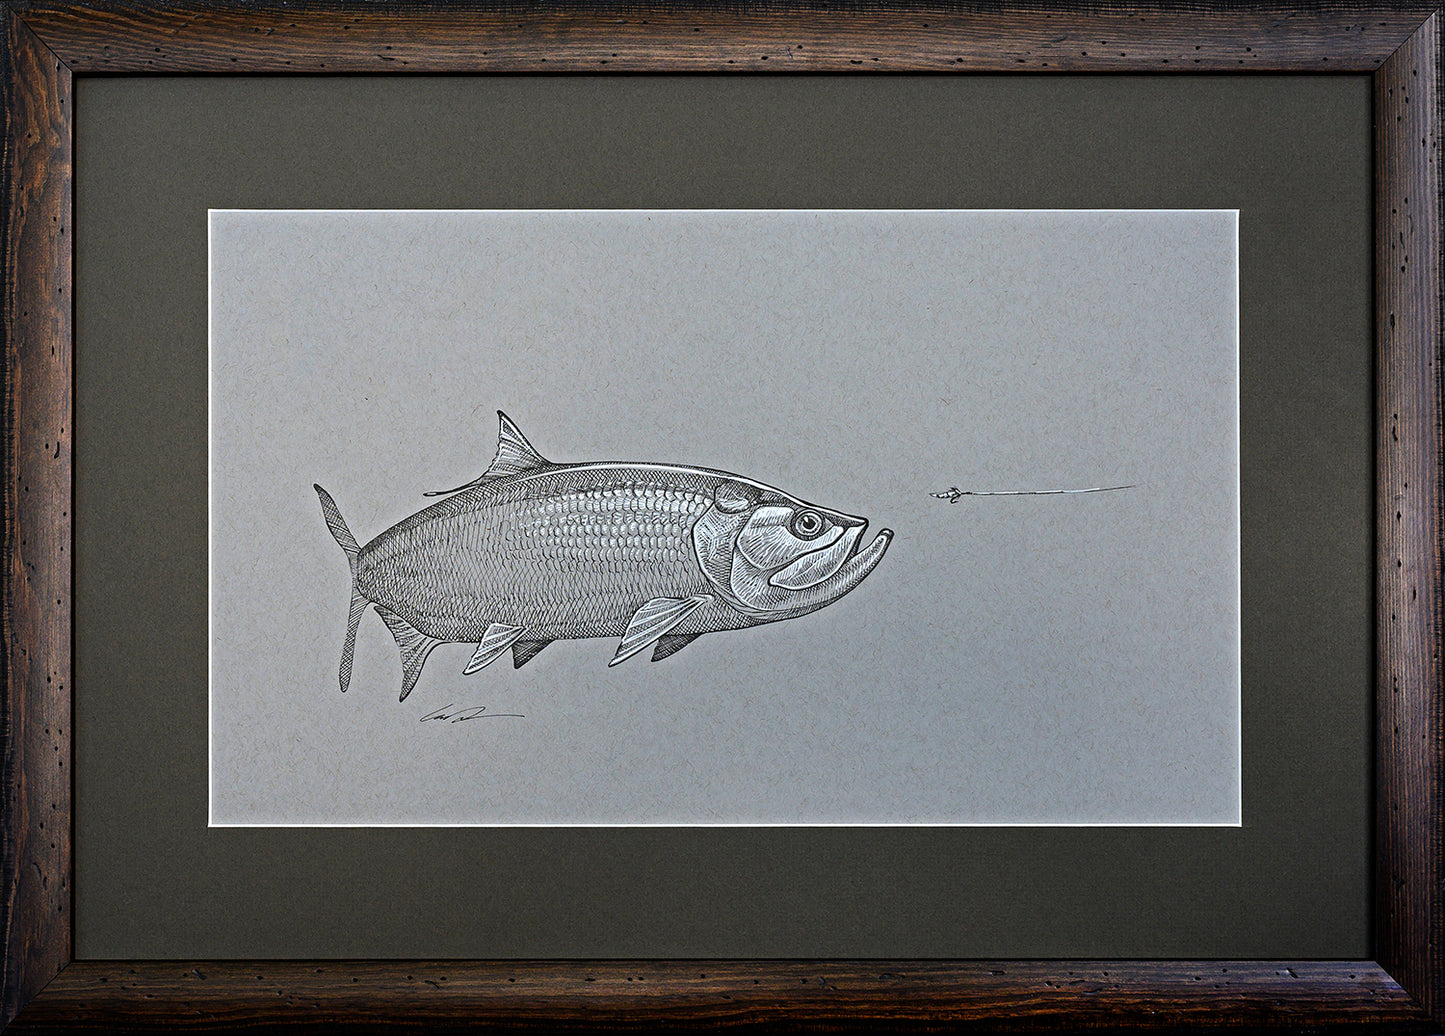 A black and white pen drawing on toned gray paper of a tarpon turning to eat a fly. Framed with a wooden frame and matted with a green mat.